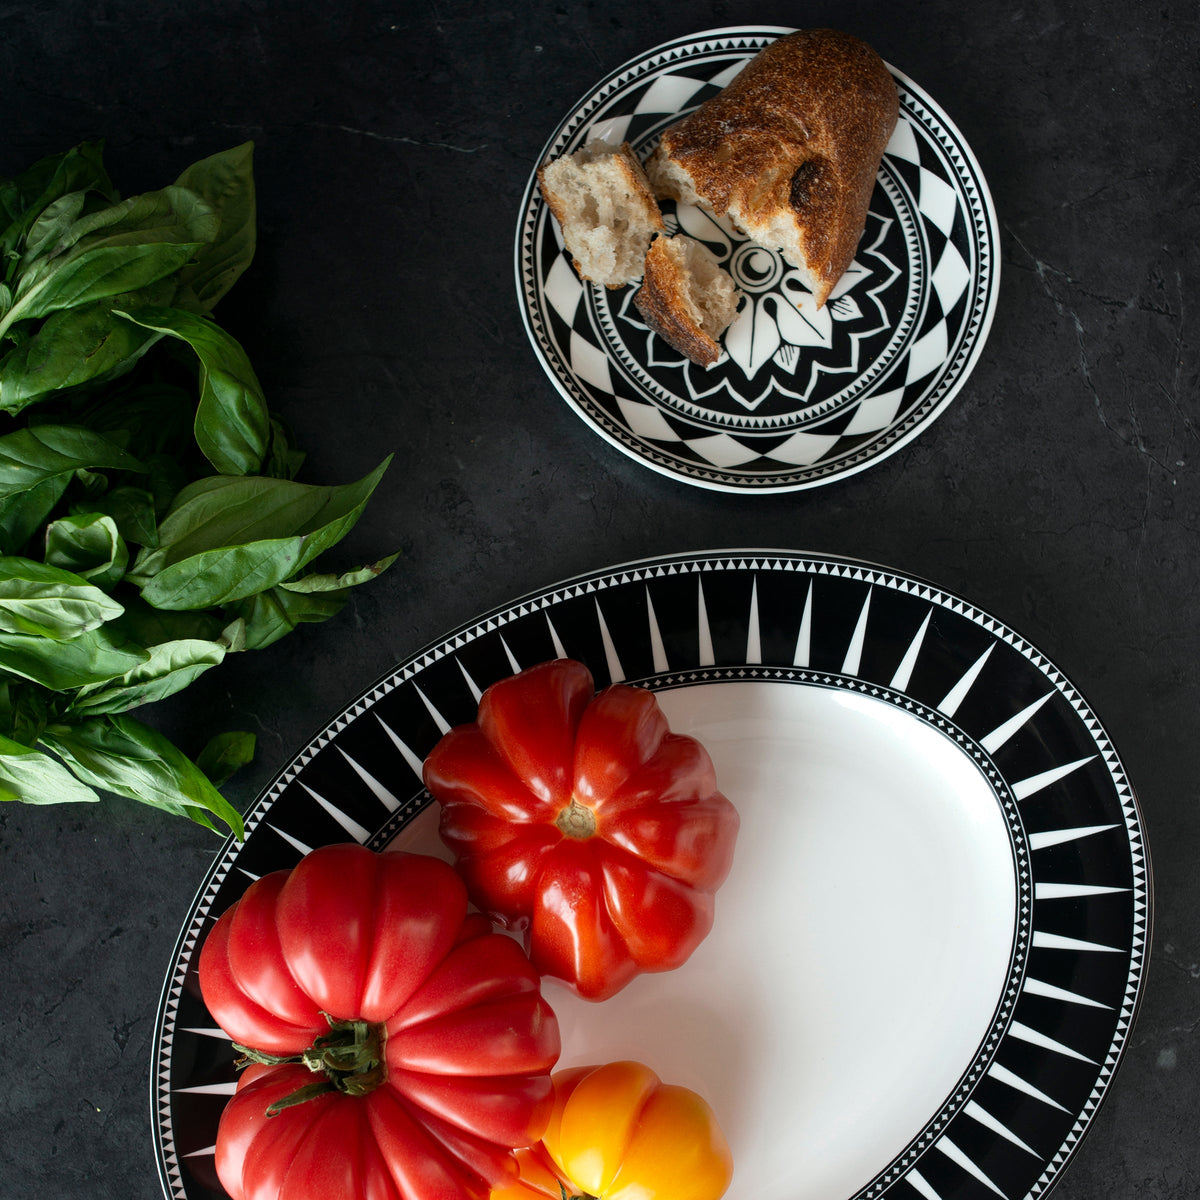 A Fez Canapé plate from Caskata Artisanal Home with delicate detail of tomatoes, bread and basil.